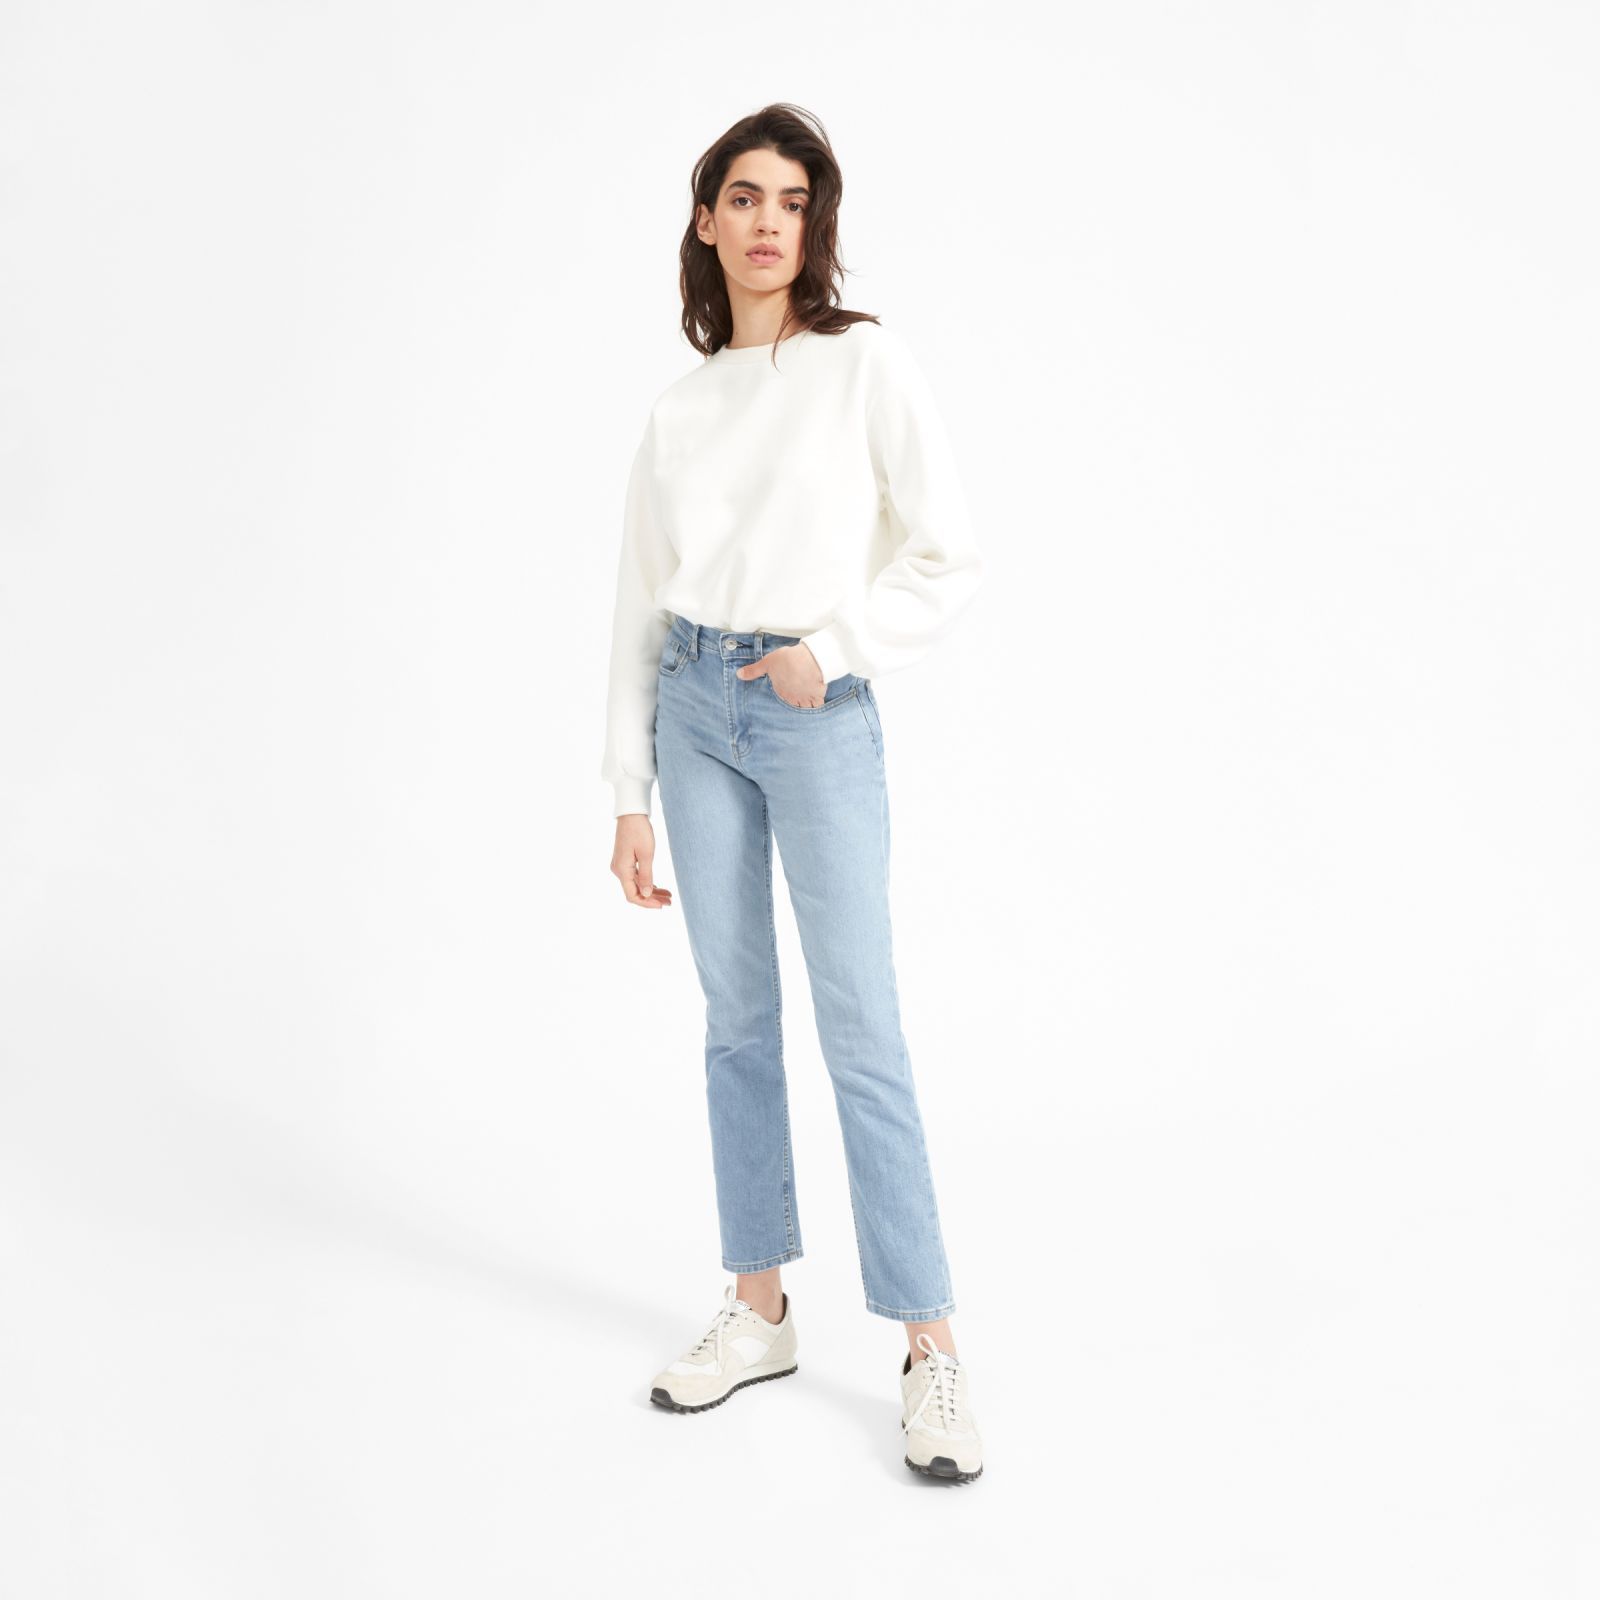 Women's Cheeky Straight Jean by Everlane in Sky Blue, Size 24 | Everlane